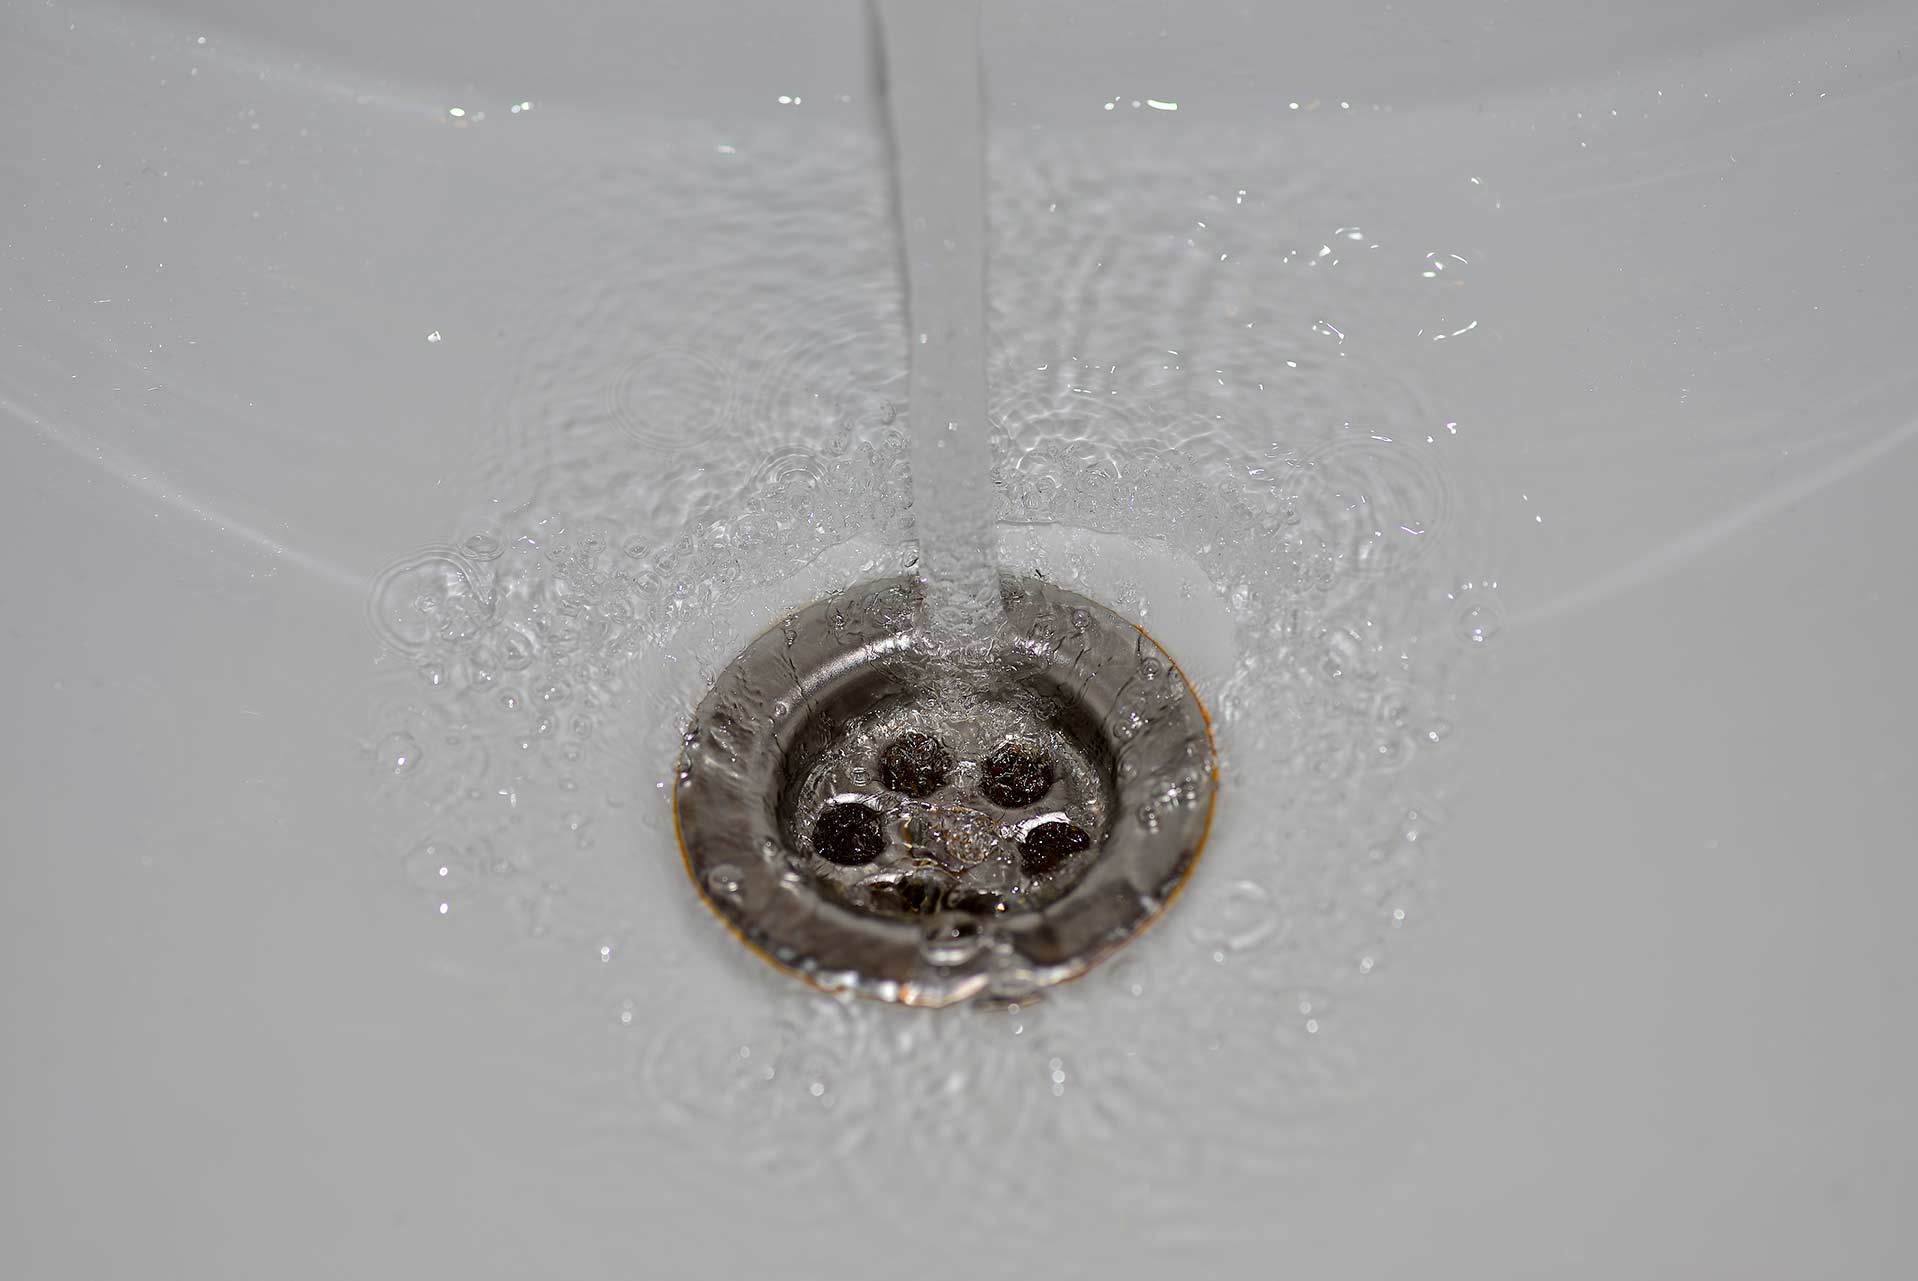 A2B Drains provides services to unblock blocked sinks and drains for properties in Bromsgrove.